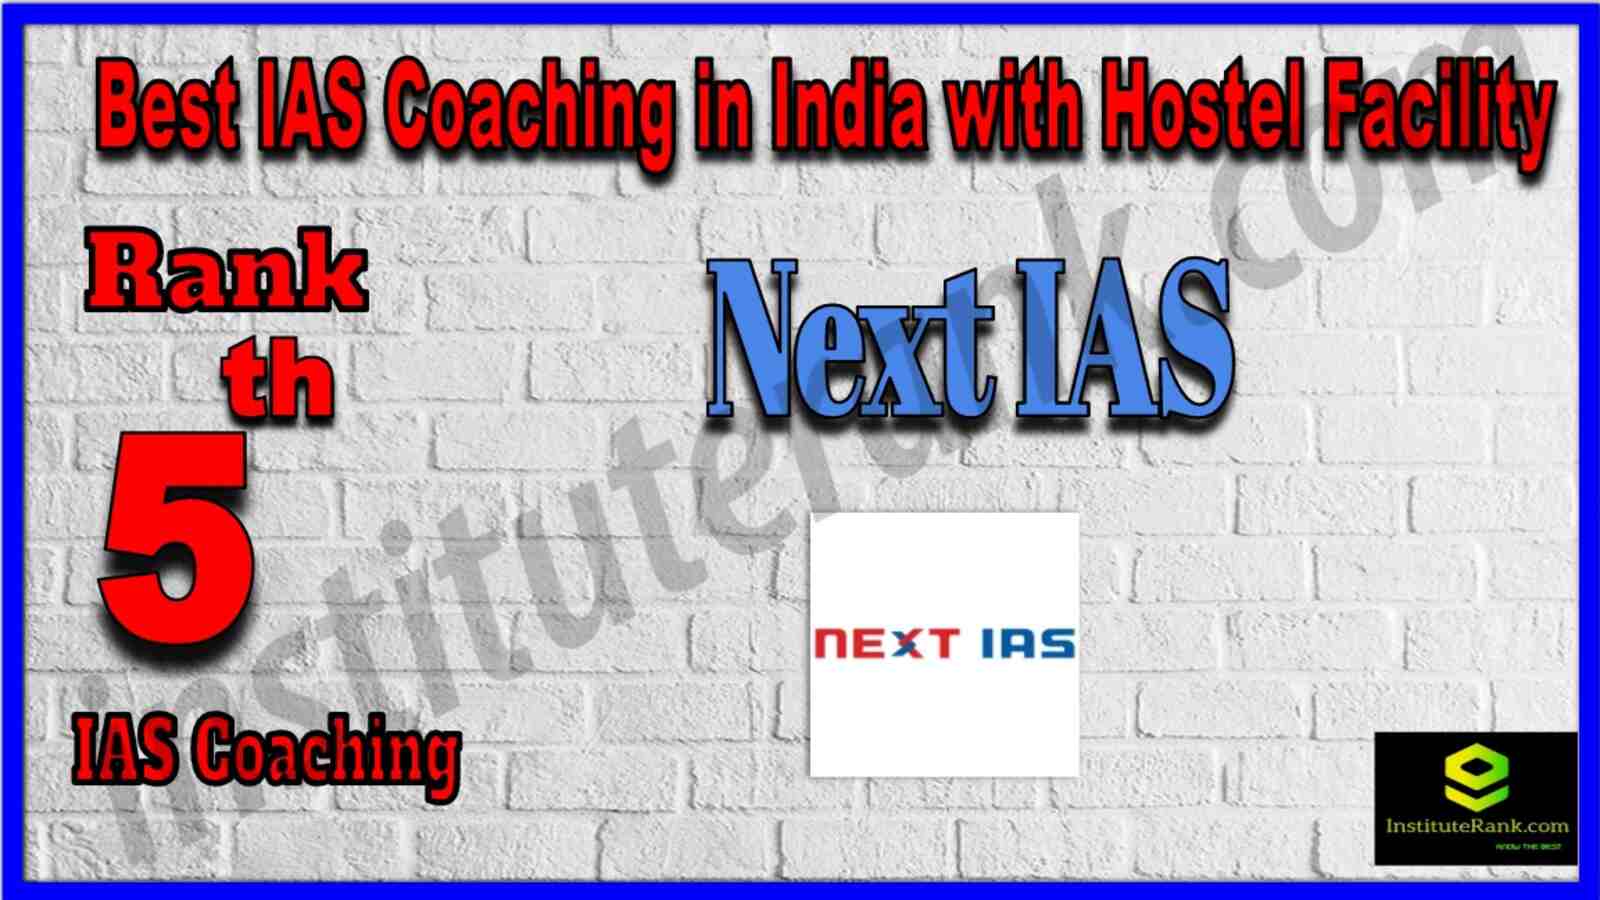 Rank 5 Best IAS Coaching in India With Hostel Facility